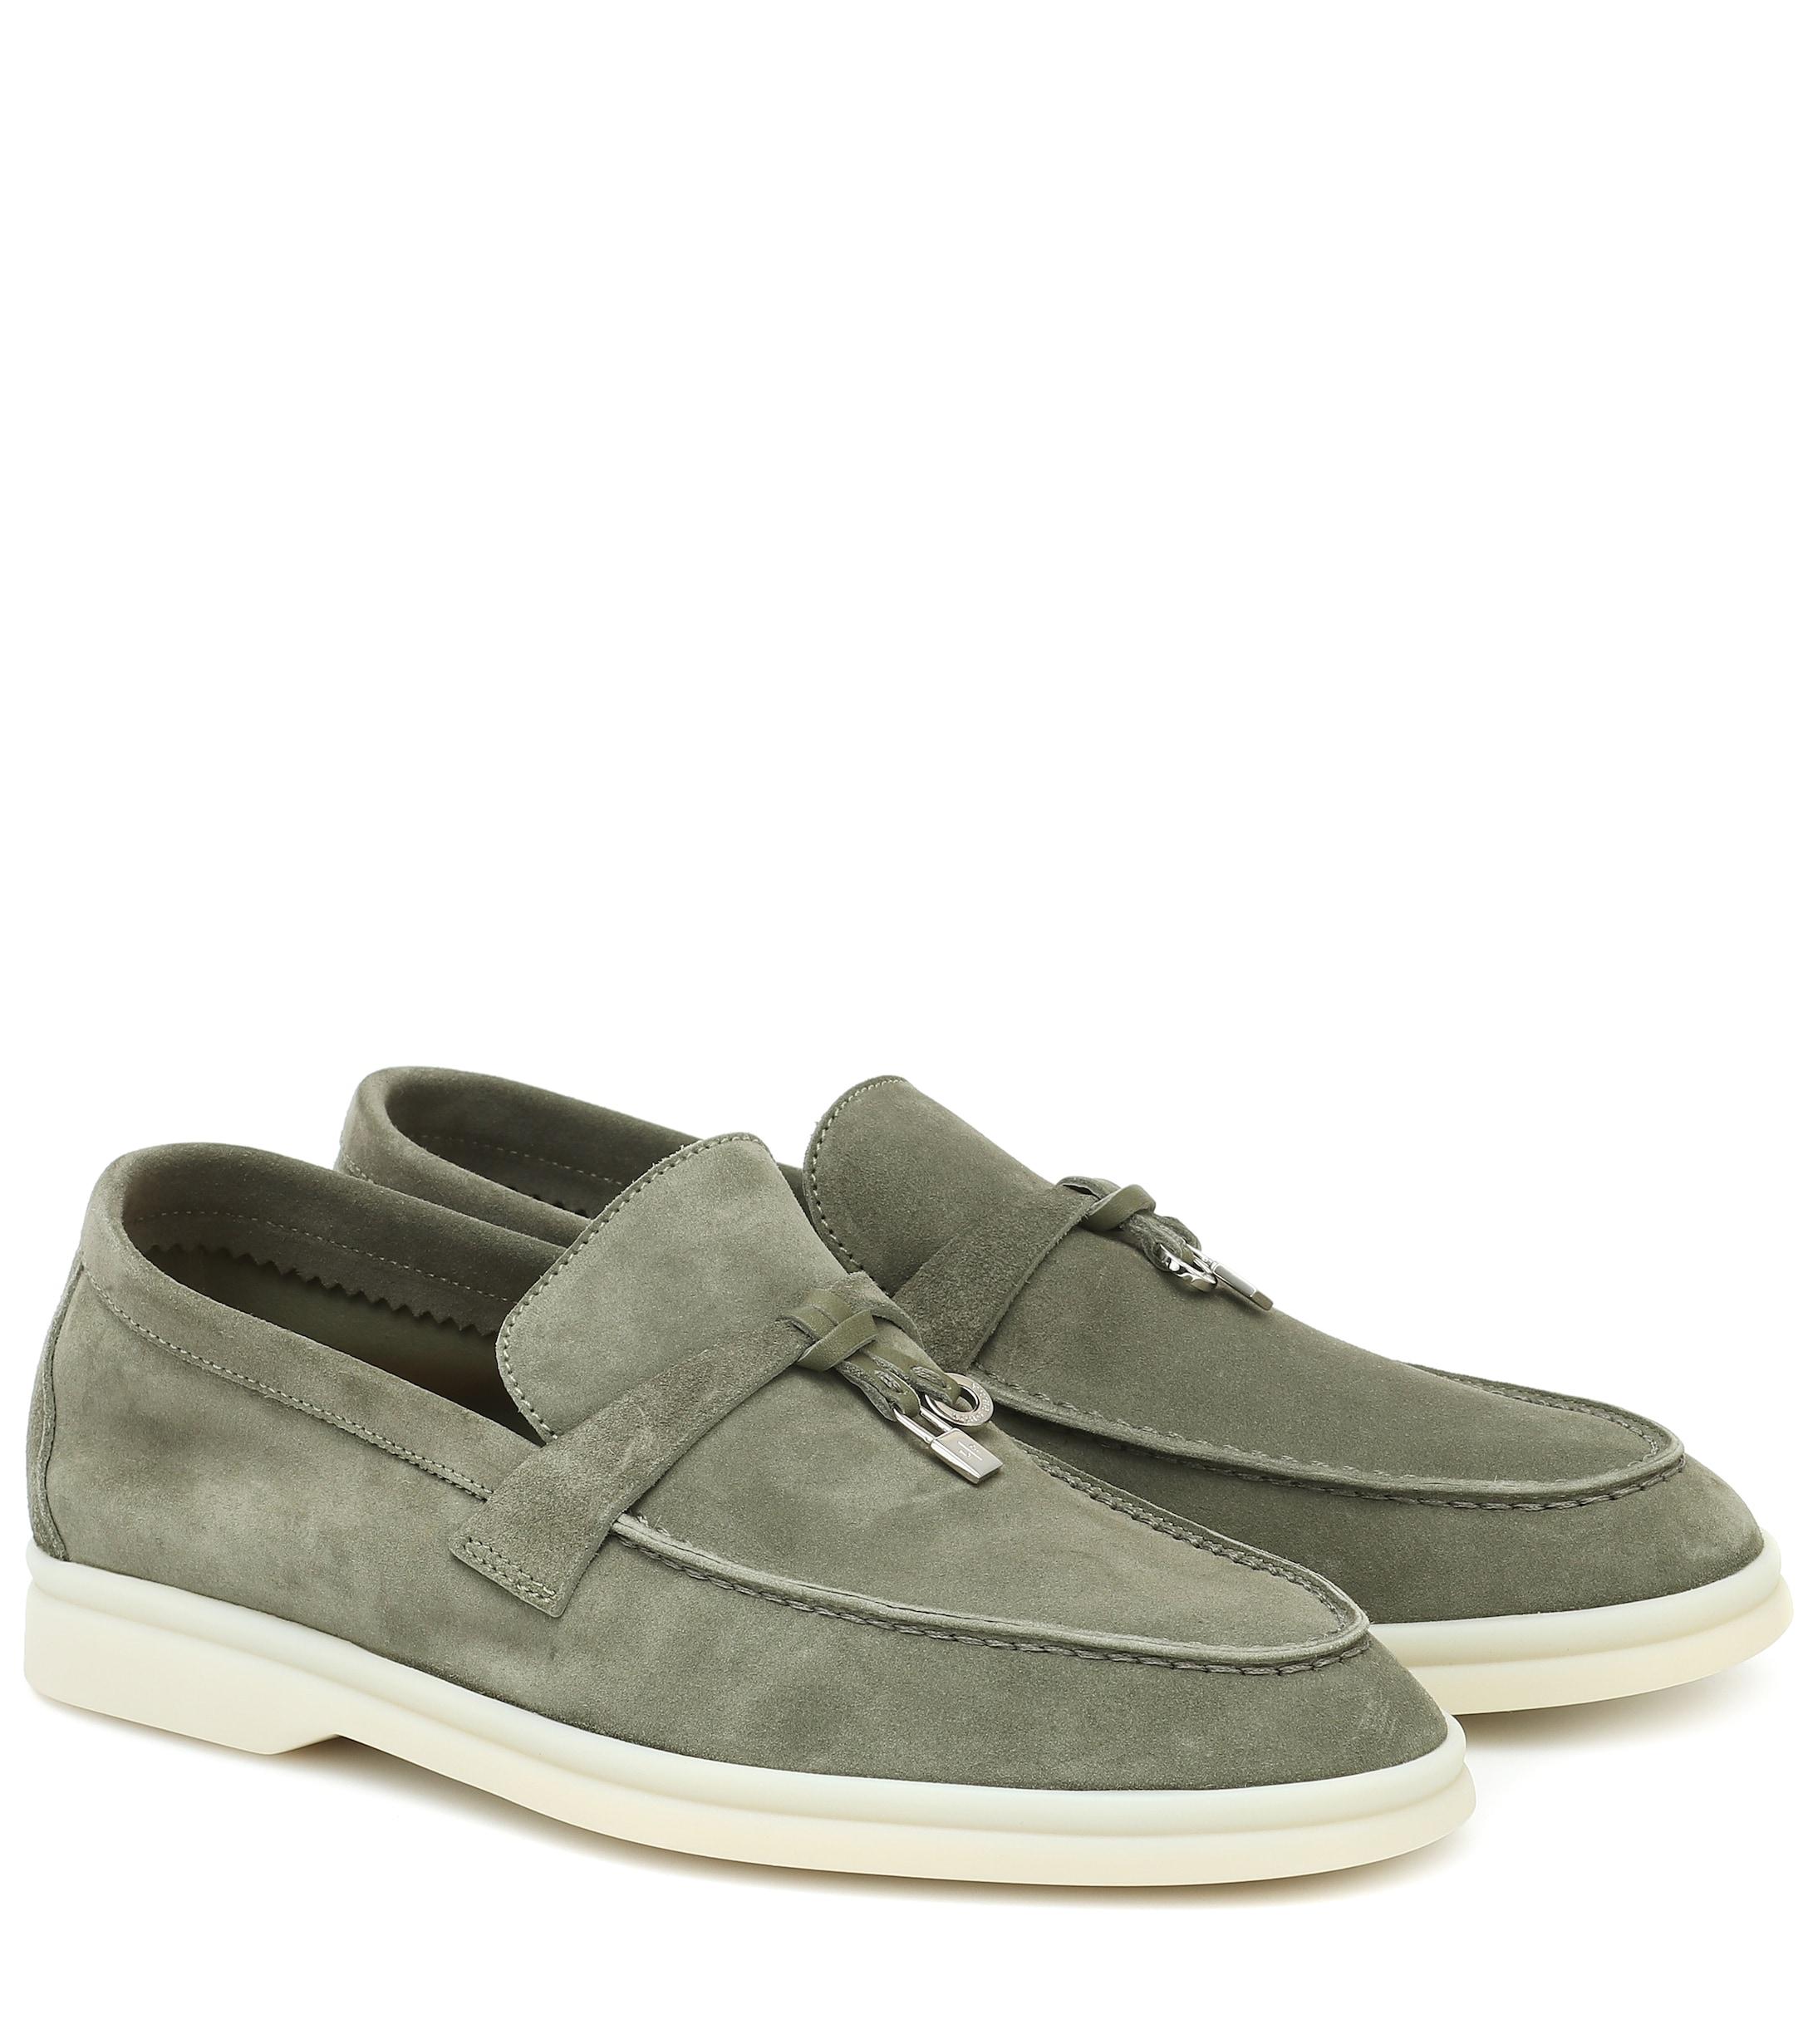 Loro Piana Summer Charms Walk Suede Loafers | Lyst